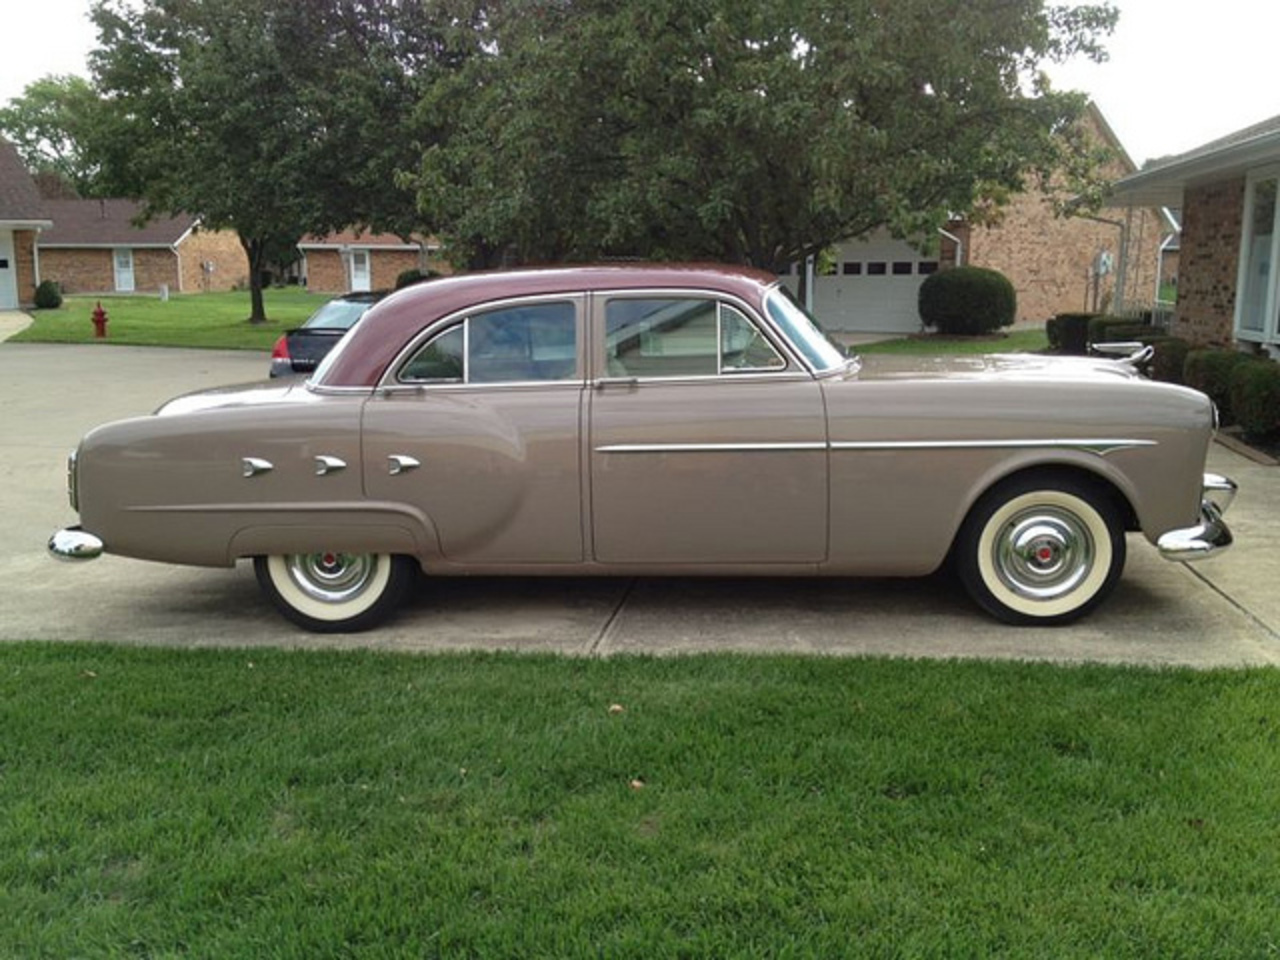 1952 Packard 200 Deluxe Touring Sedan | Flickr - Photo Sharing!